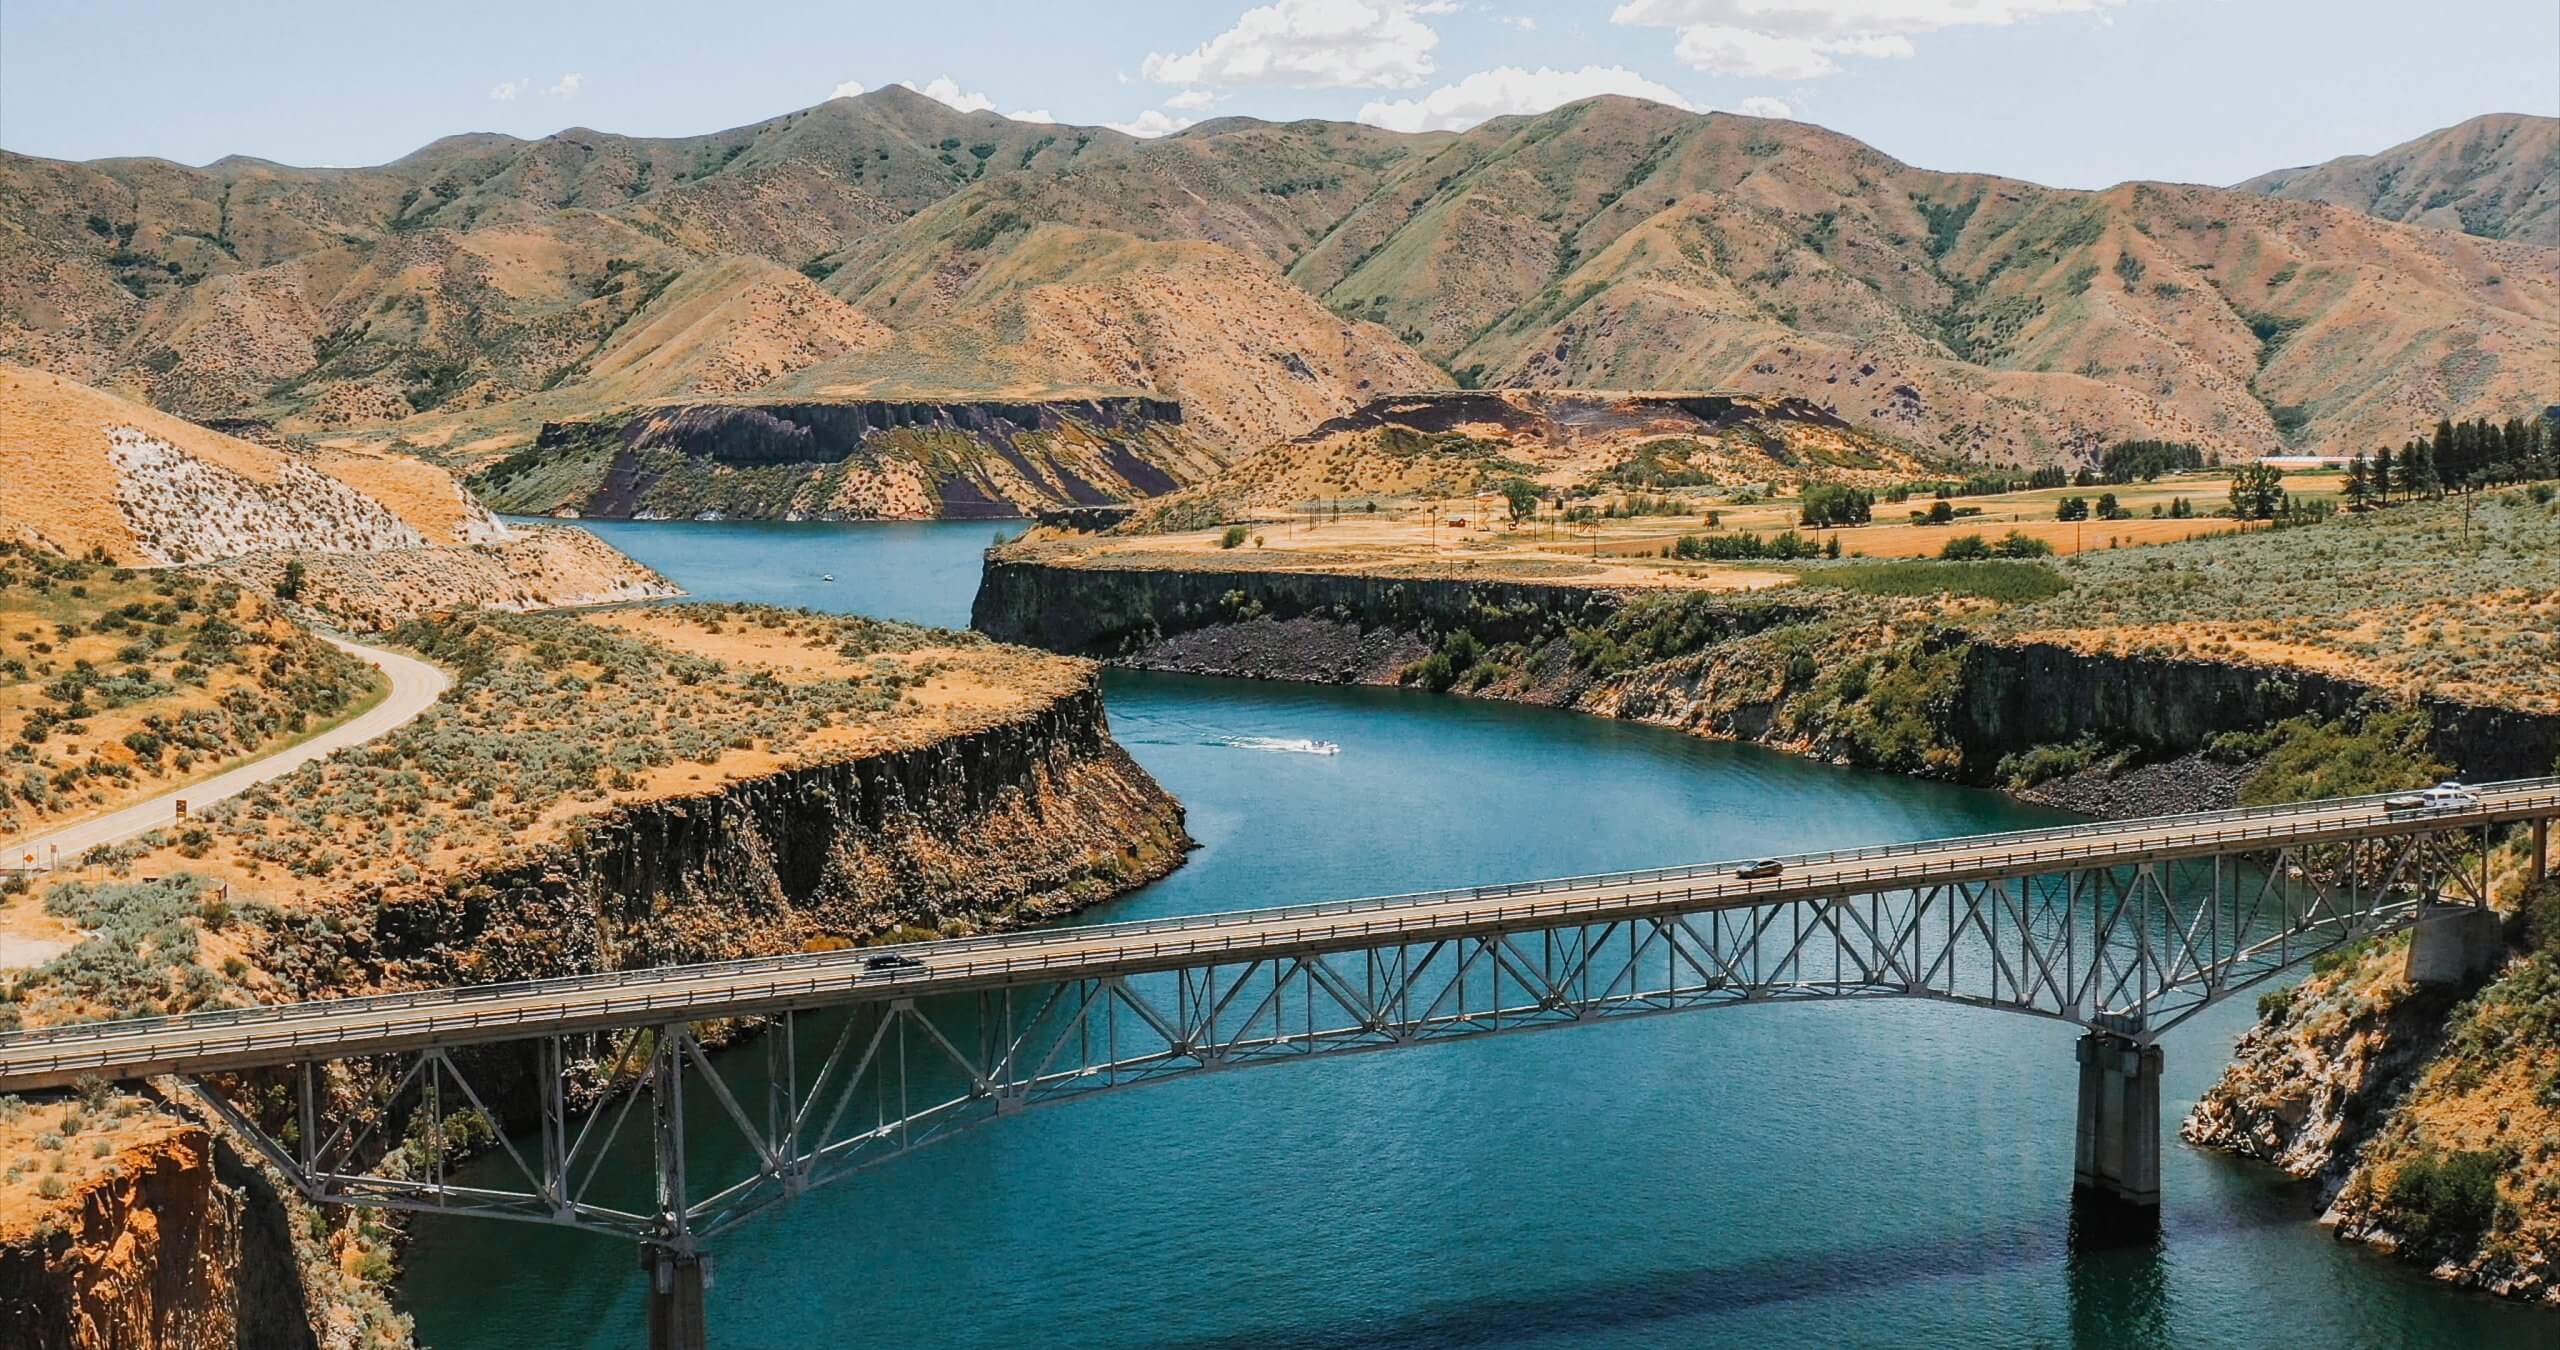 a bridge crossing a reservoir with mountains in the background